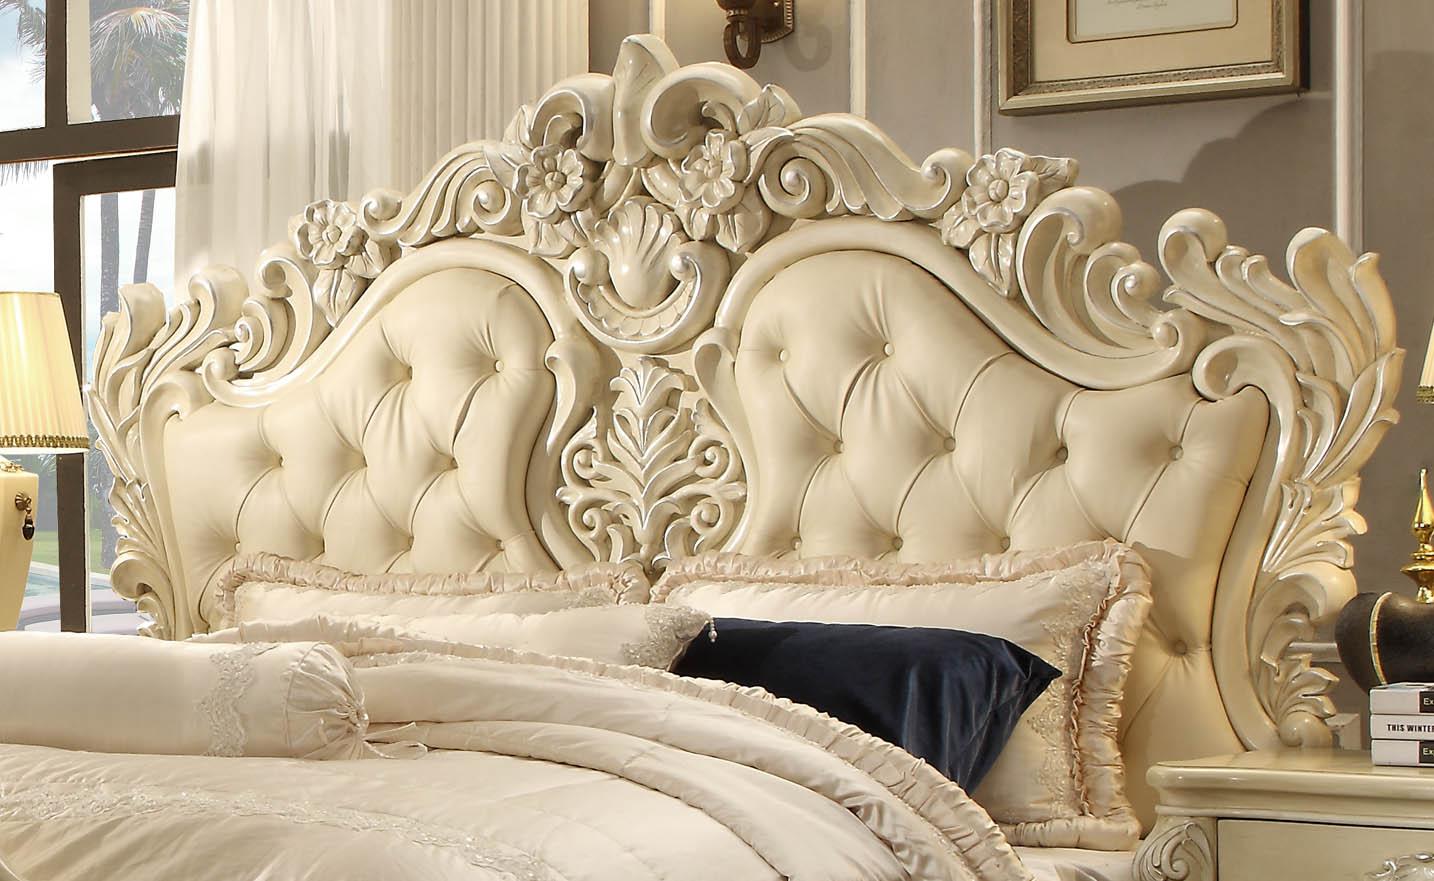 

    
Luxury Pearl Cream CAL King Bed Carved Wood Traditional Homey Design HD-5800
